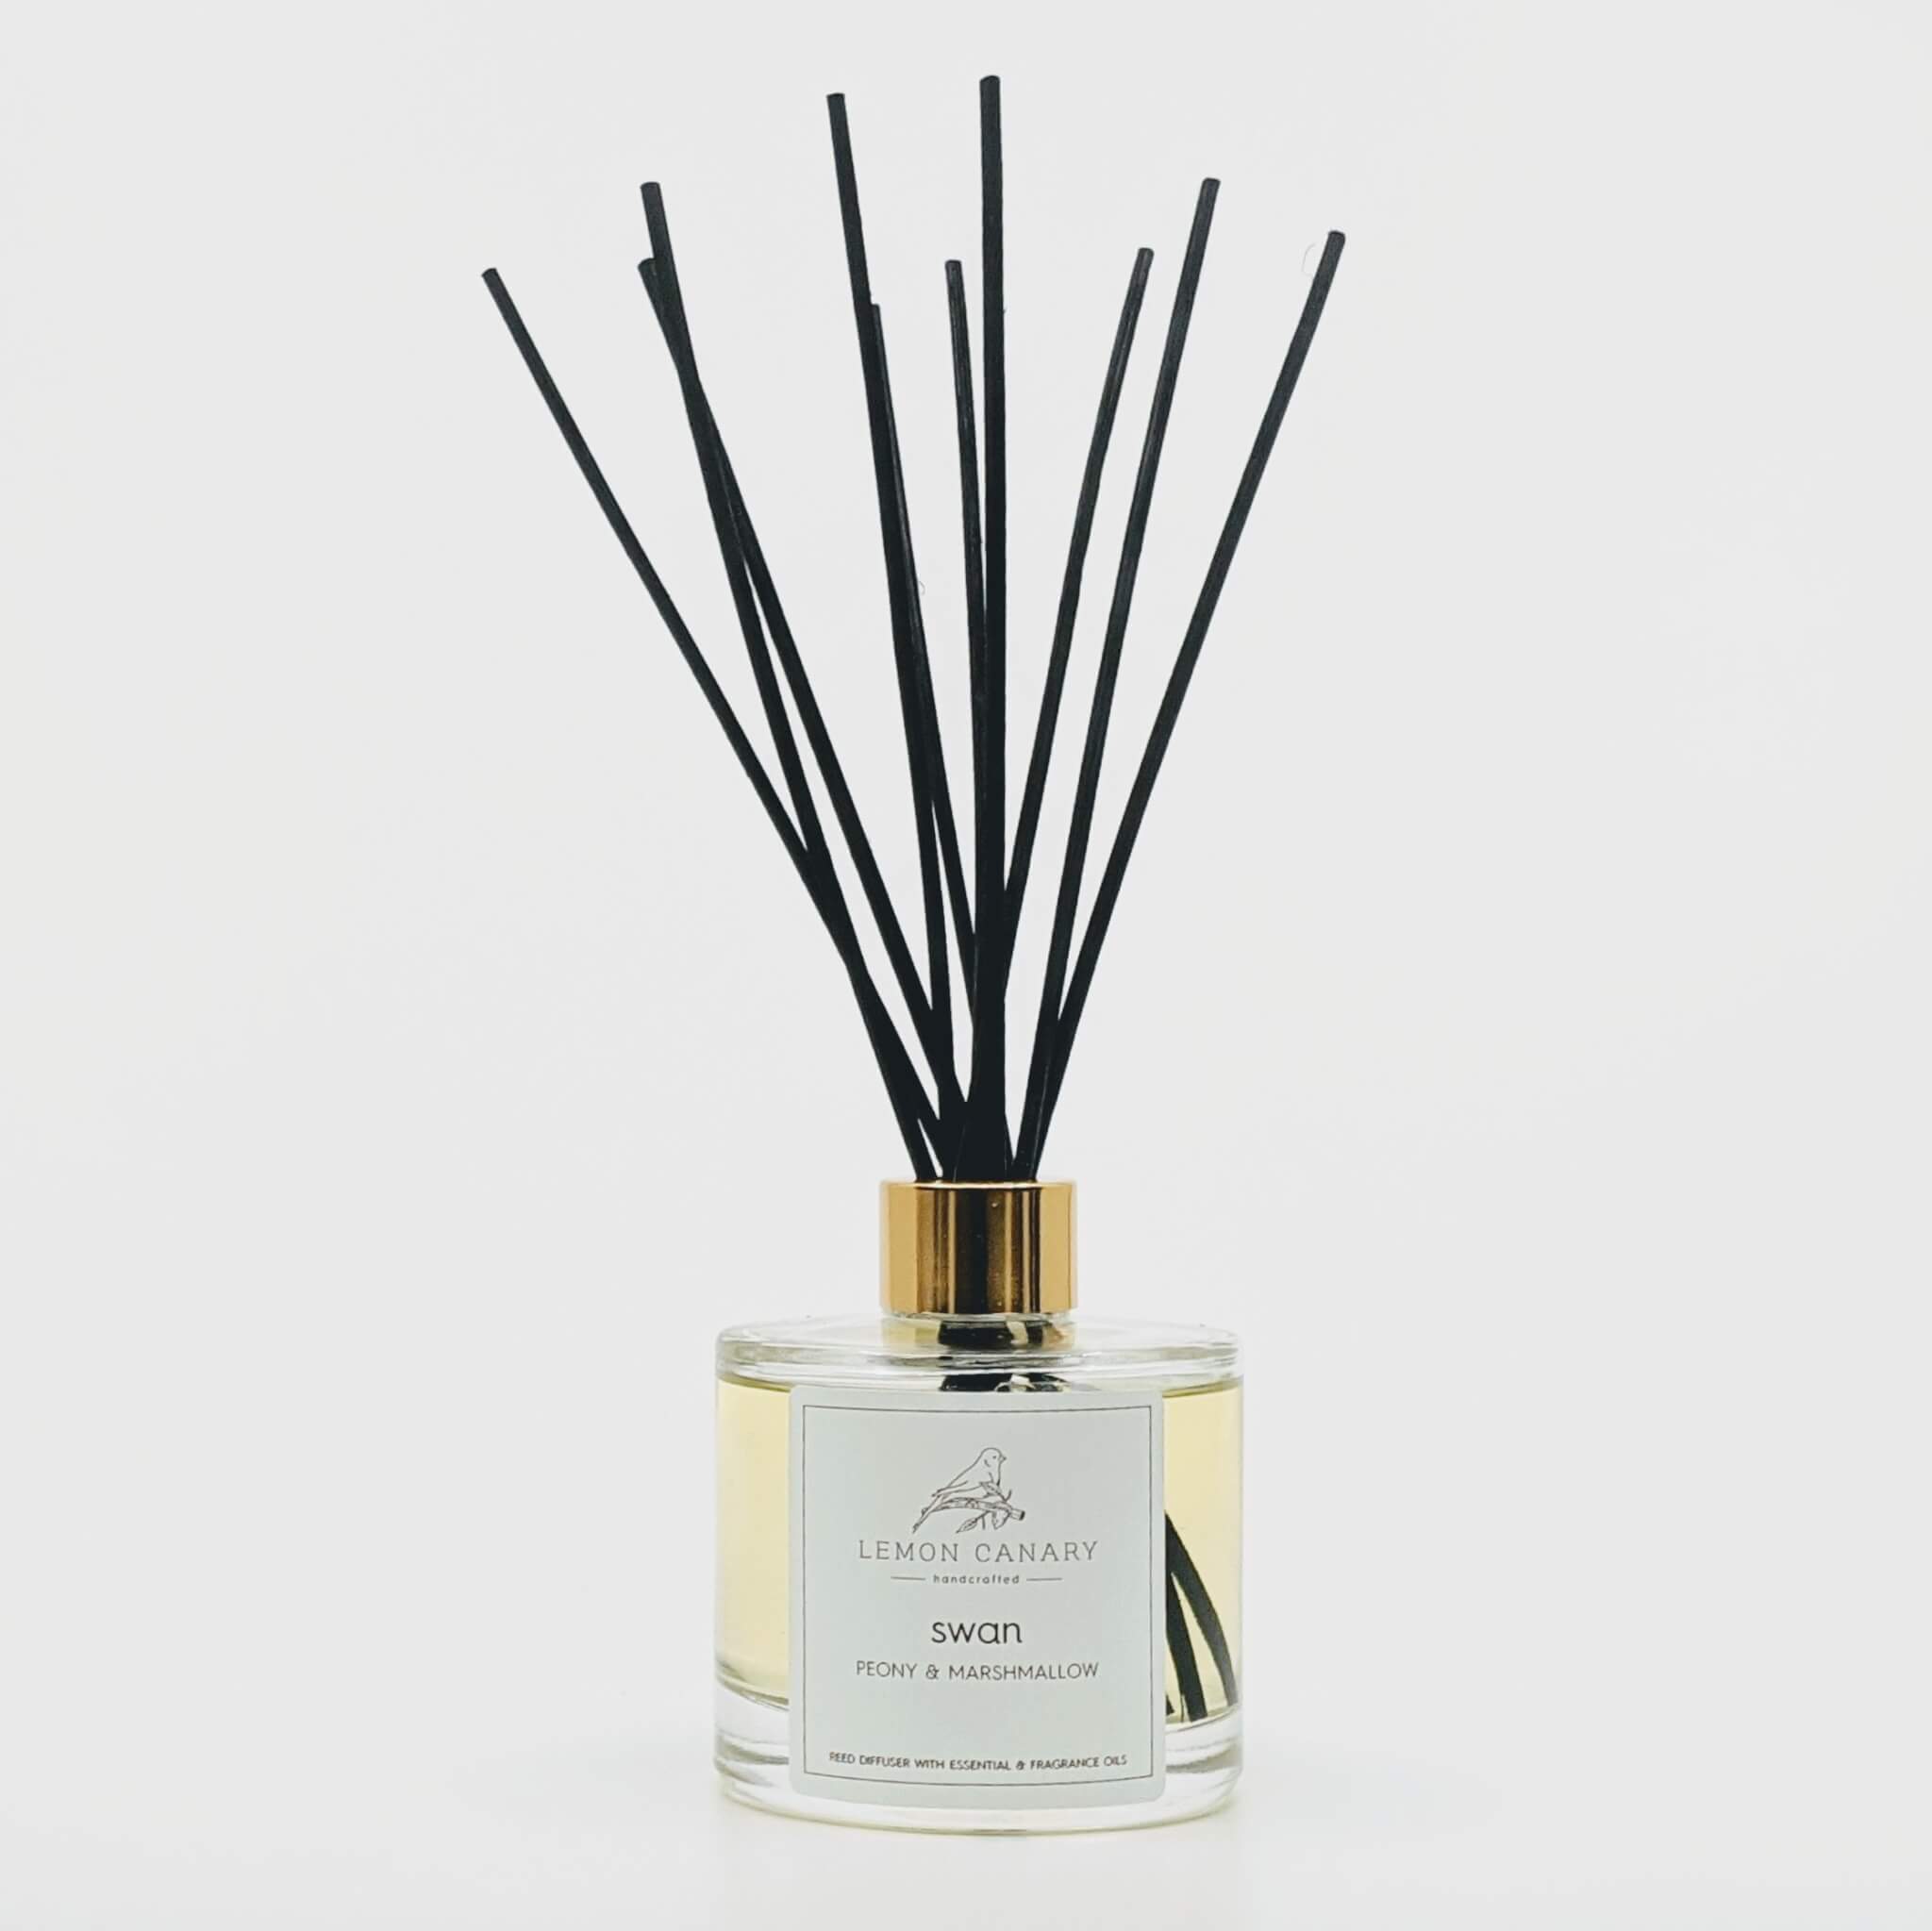 200ml Reed Diffuser Oil Refill with Rattan Sticks, Essential Oils for